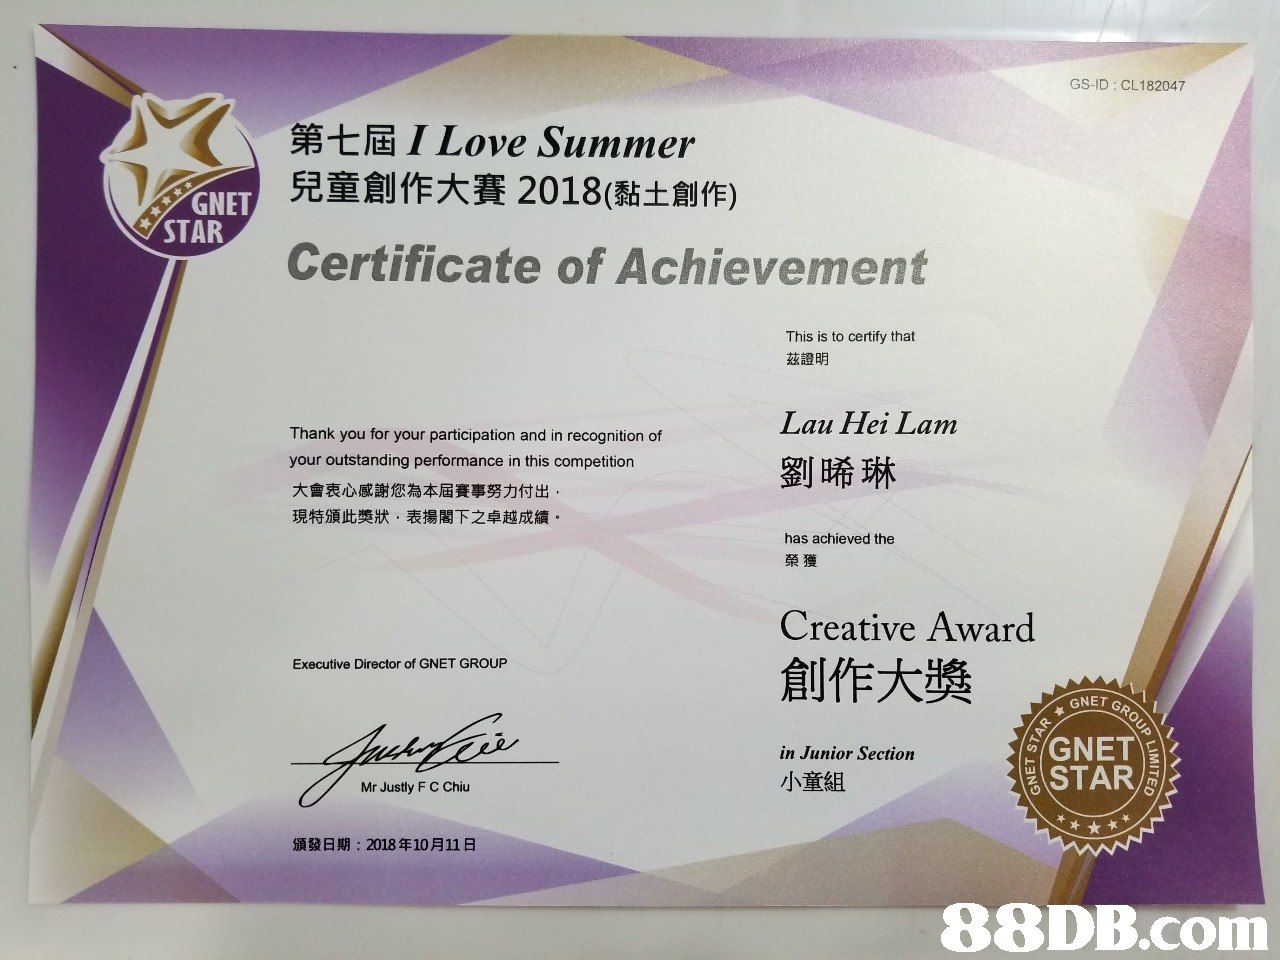 GS-ID CL182047 第七屆 Love Sunnier 兒童創作大賽2018(黏土創作) STAR Certificate of Achievement This is to certify that 茲證明 Lau Hei Lam Thank you for your participation and in recognition of your outstanding performance in this competition 大會衷心感謝您為本屆賽事努力付出 現特頒此獎狀,表揚閣下之卓越成績 劉晞琳 has achieved the 榮獲 Creative Award 創作大奬 Executive Director of GNET GROUP GNET GR in Junior Section Mr Justly F C Chiu 小童組 頒發日期: 2018年10月11日   text,purple,academic certificate,diploma,